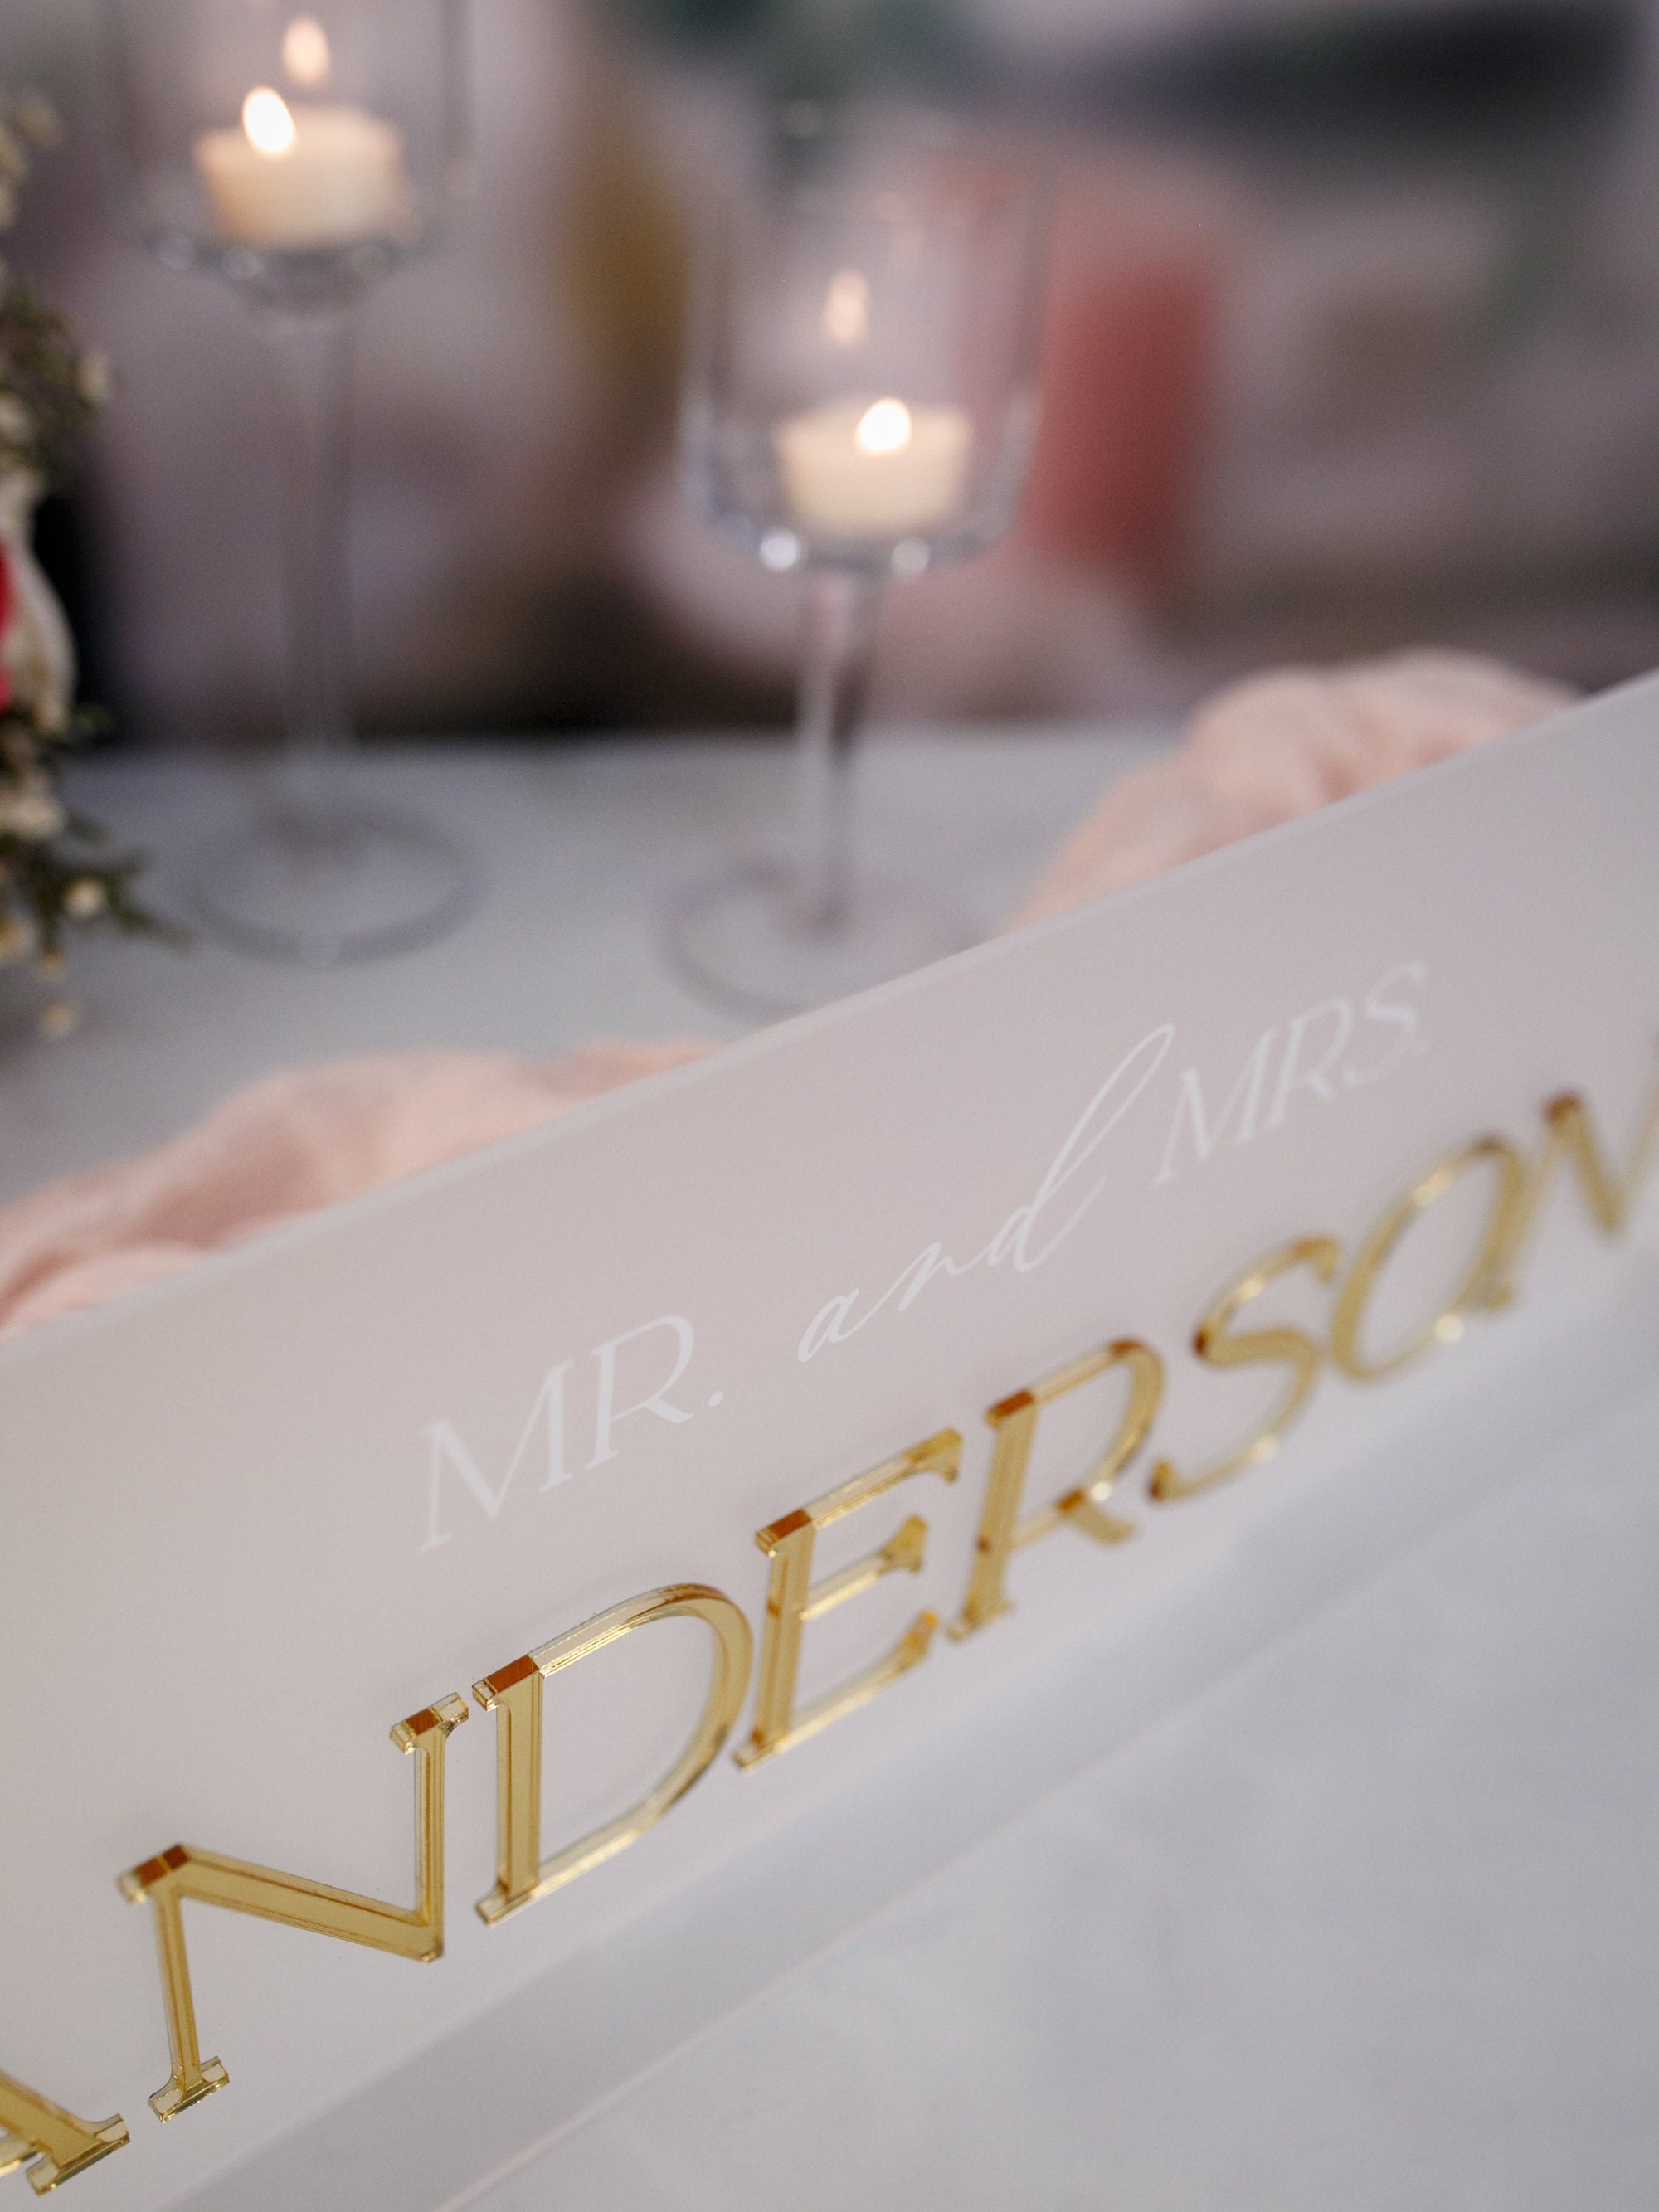 3D Mirrored Acrylic Wedding Head Table Mr Mrs Sign, Laser Cut Last Name Bride and Groom Newlywed Sweetheart Table Decor Gold Frosted Signage